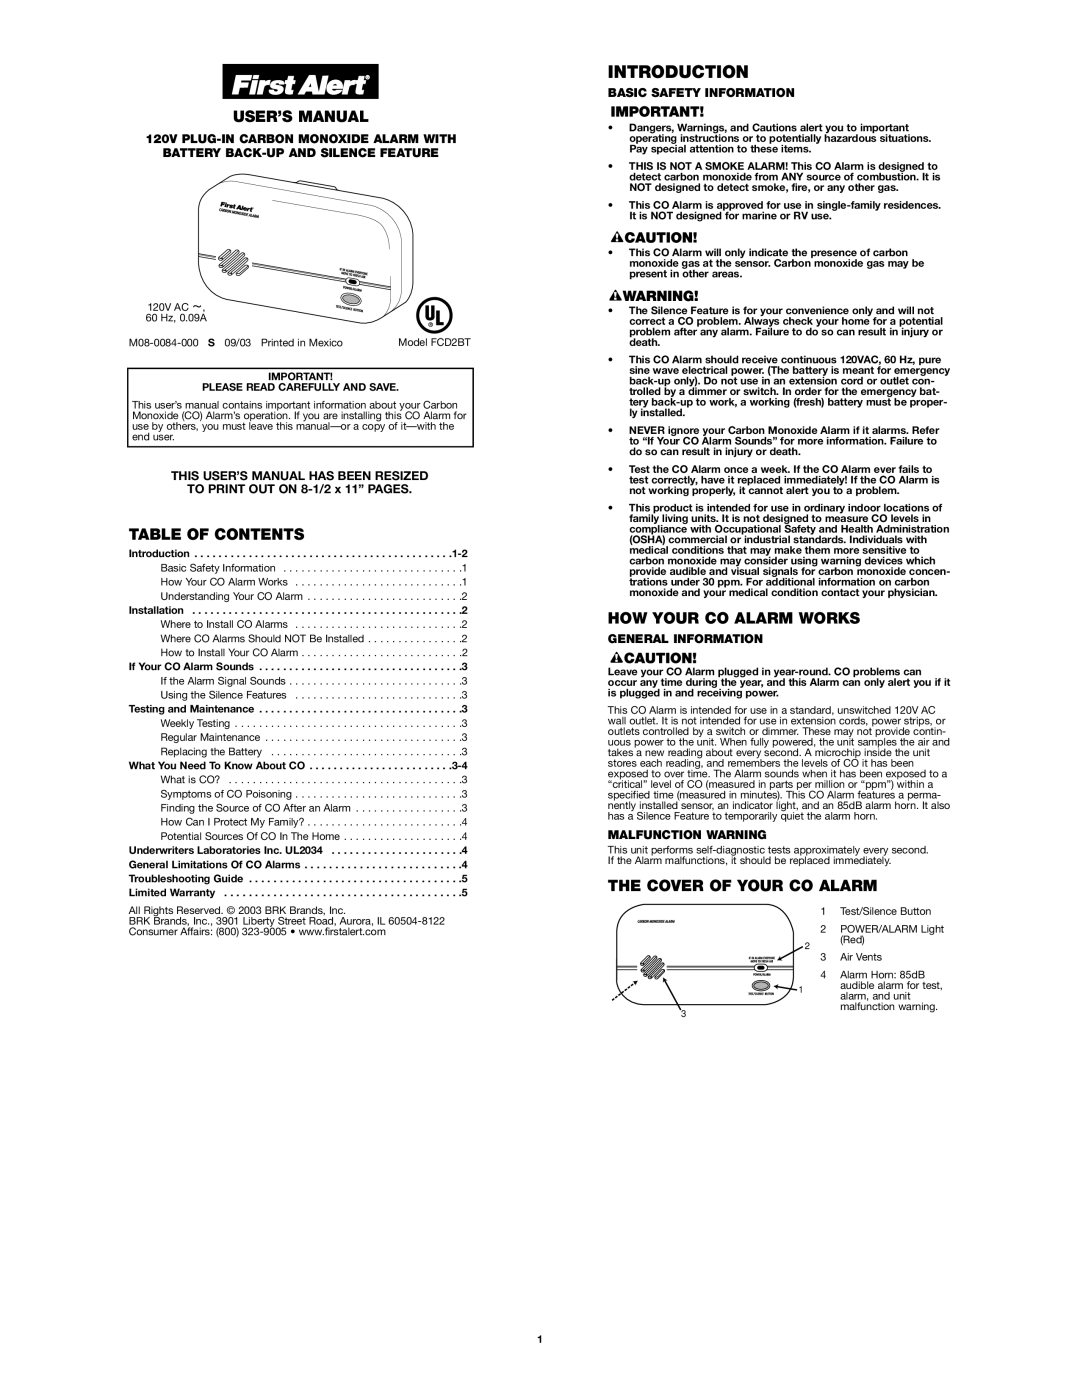 BRK electronic FCD2BT user manual Introduction, User’S Manual, Table Of Contents, How Your Co Alarm Works 